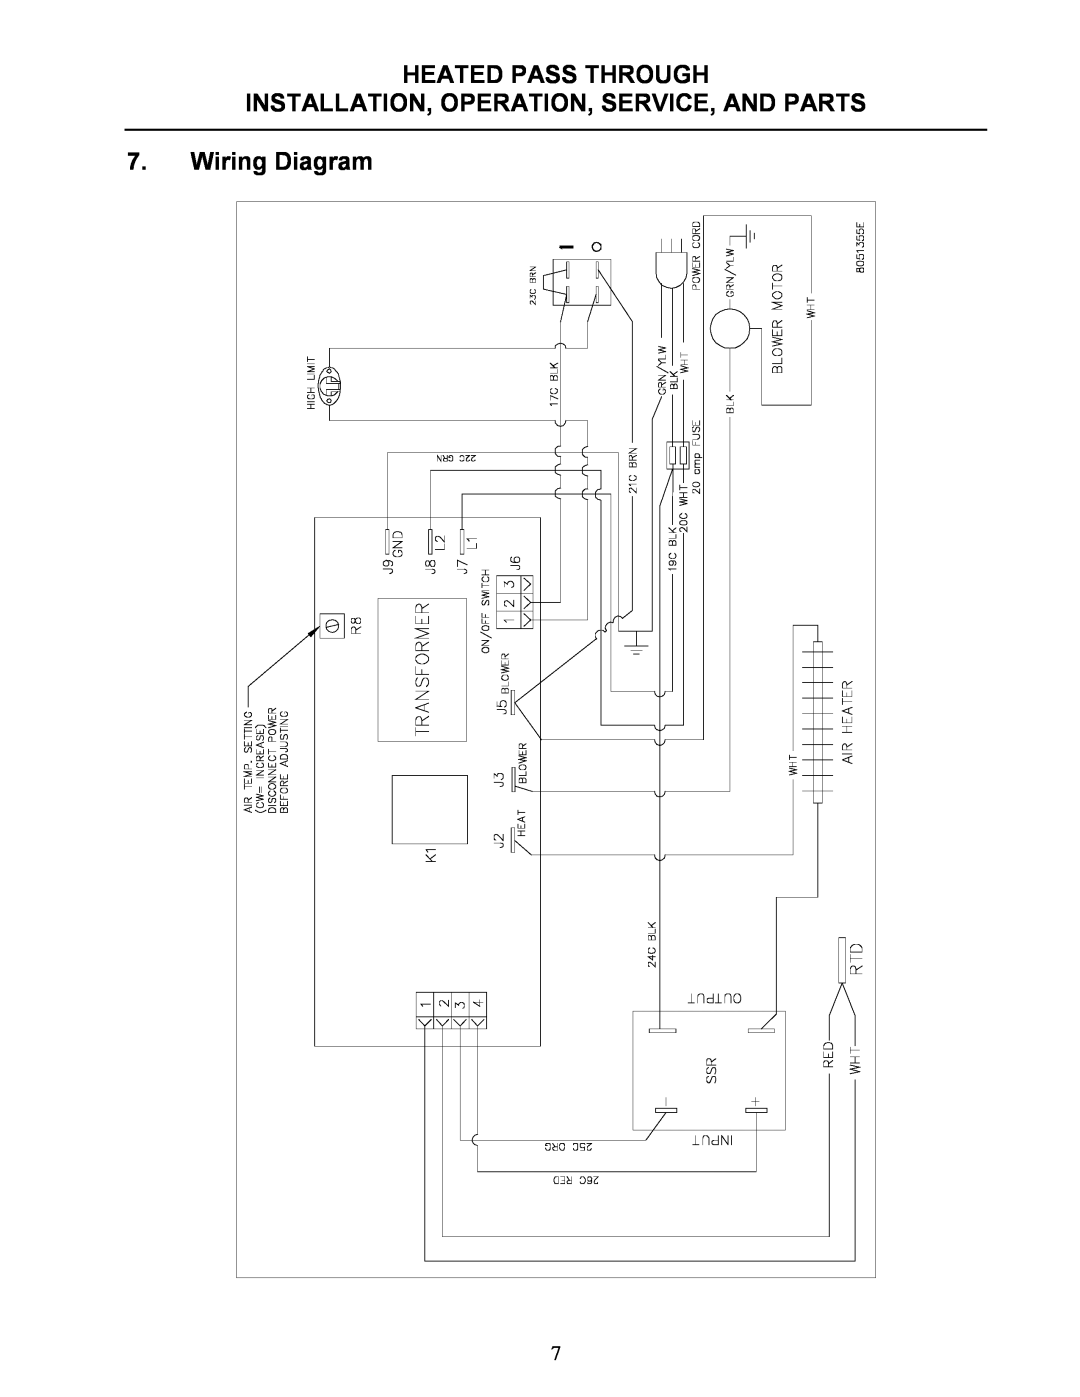 Frymaster none manual Wiring Diagram, Heated Pass Through Installation, Operation, Service, And Parts 